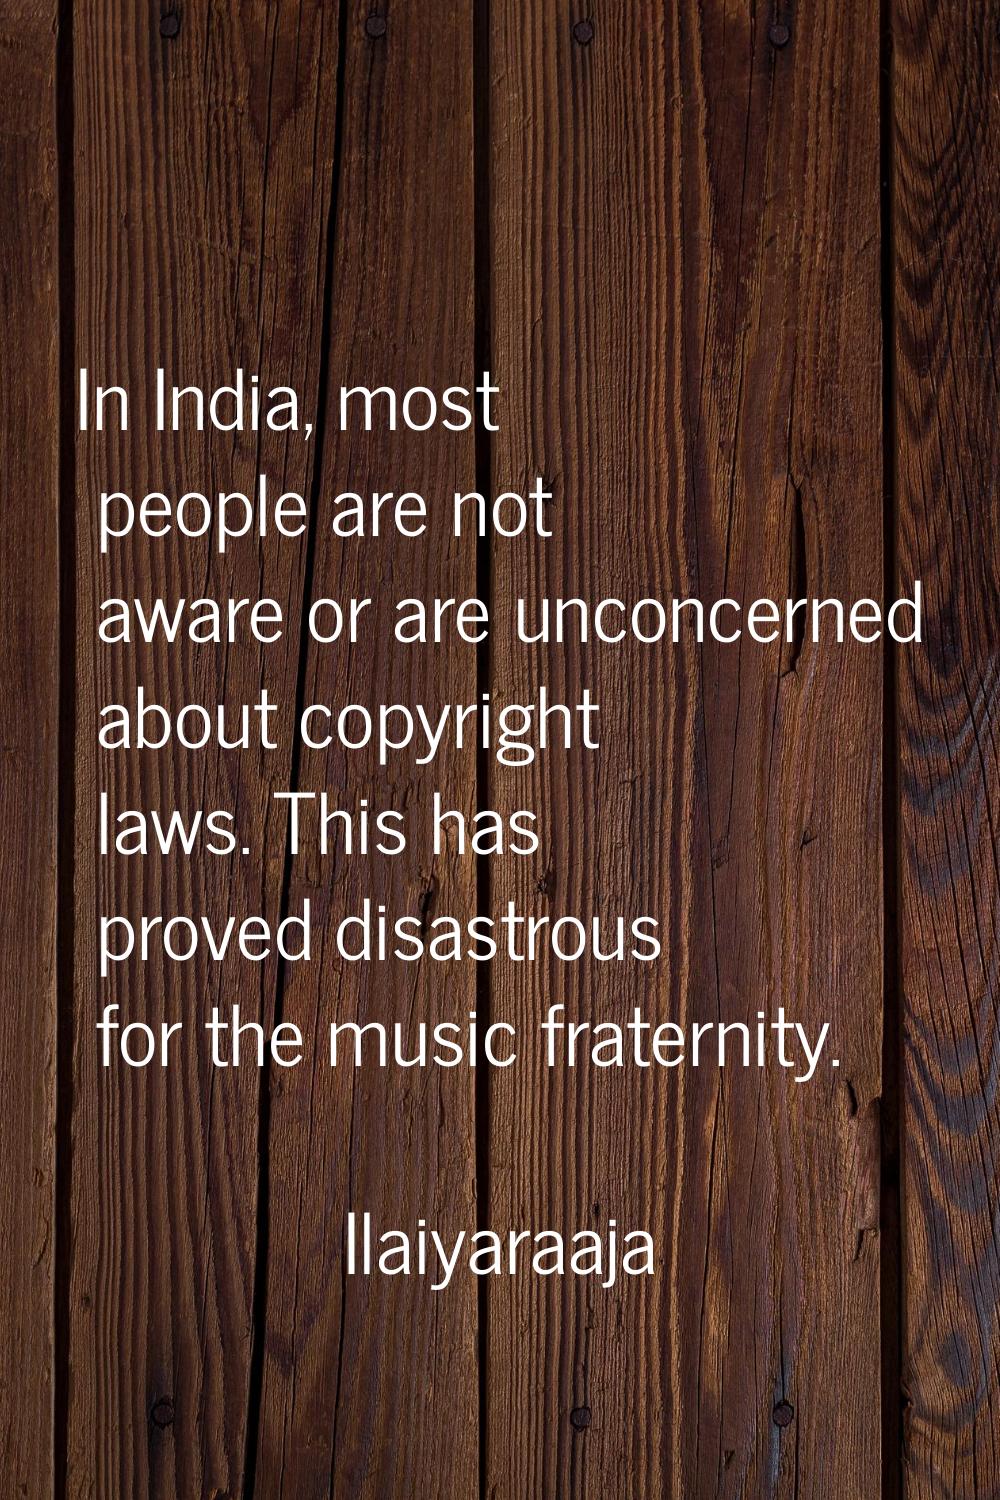 In India, most people are not aware or are unconcerned about copyright laws. This has proved disast